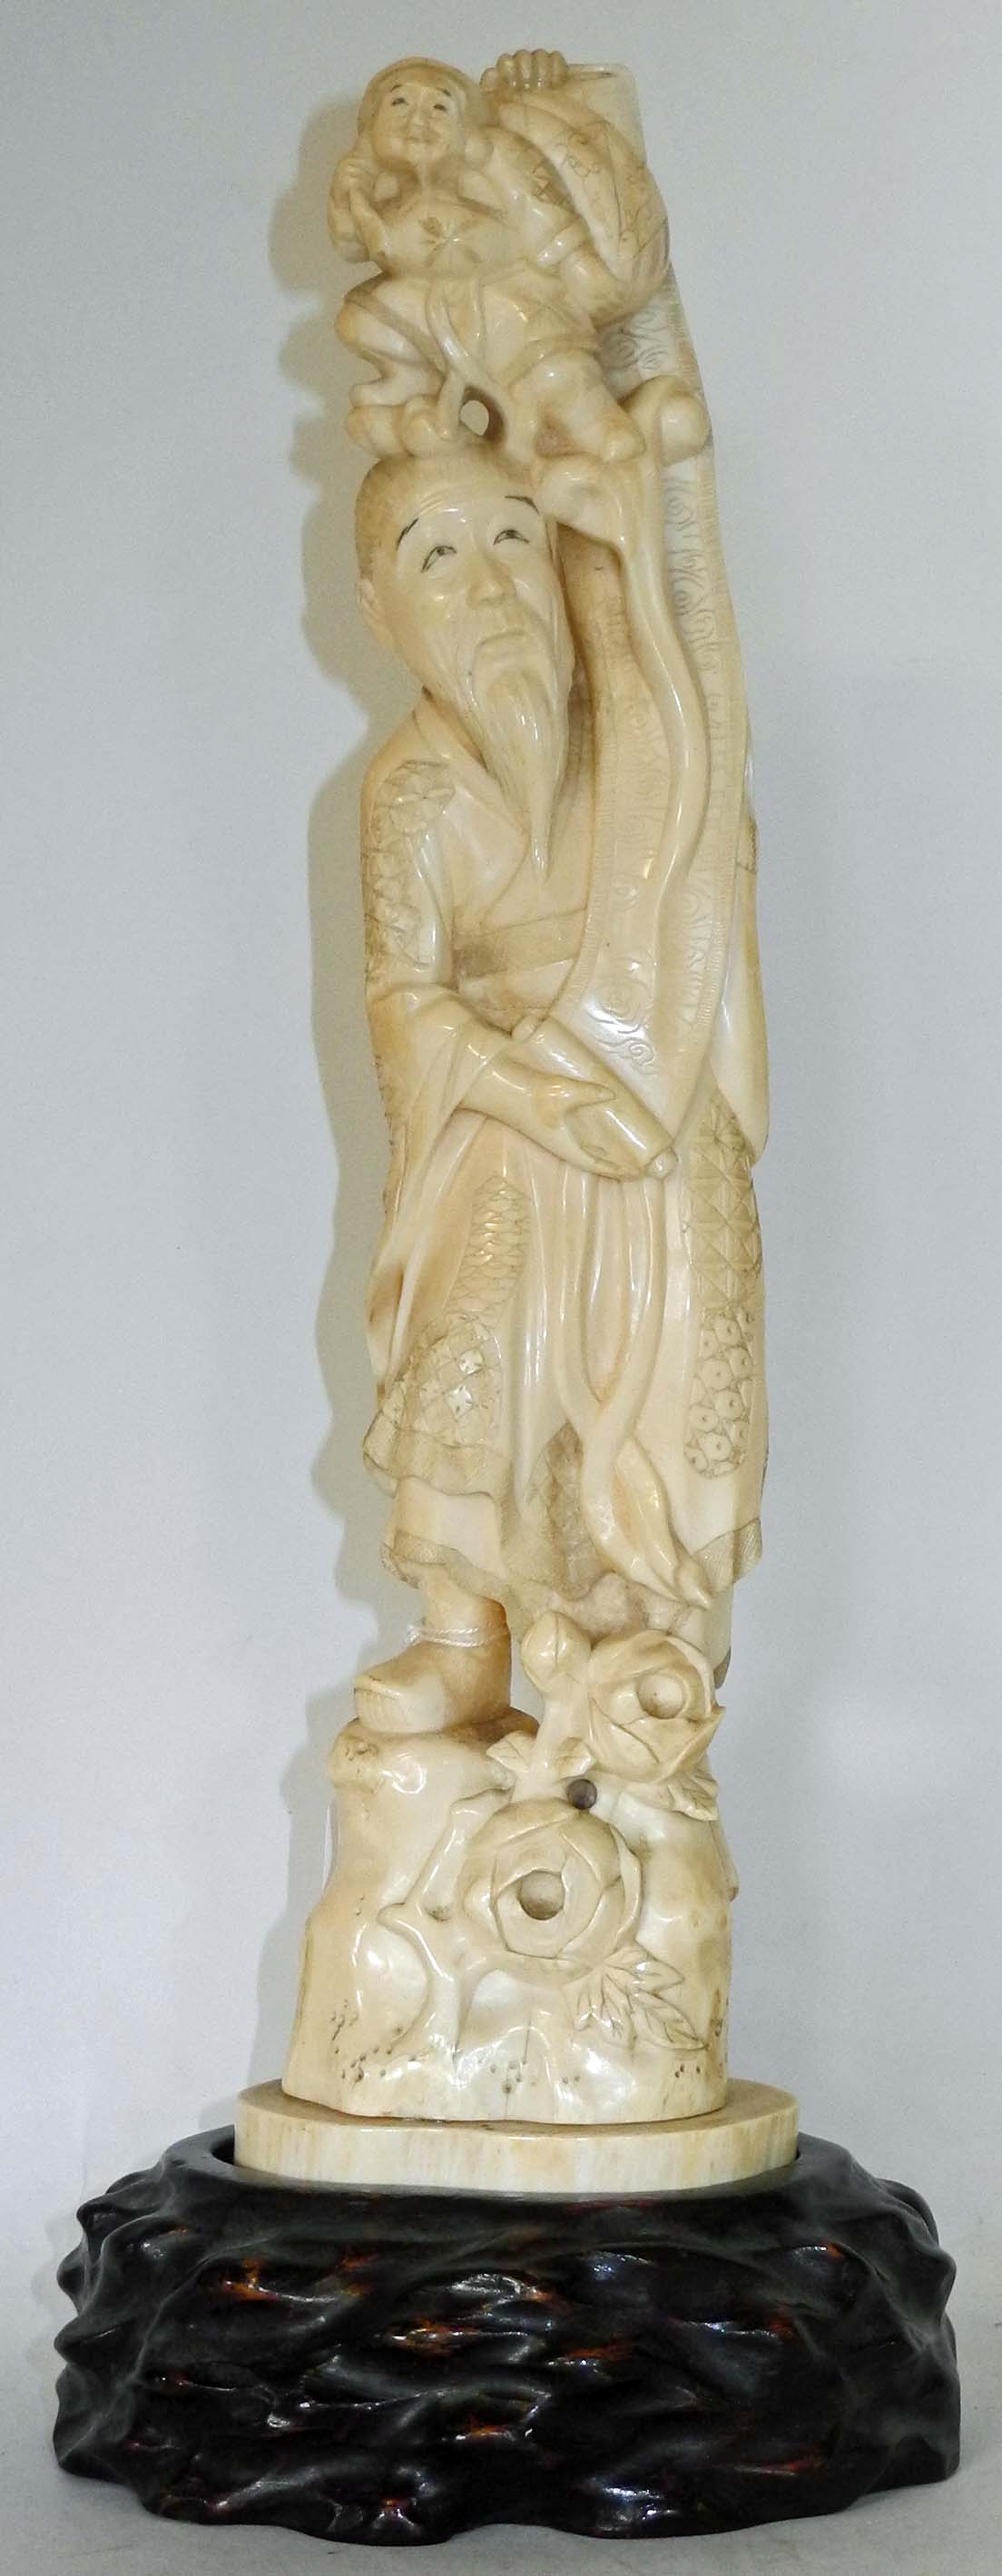 A large antique Japanese ivory carving of a sage standing with a child on his head, on wooden